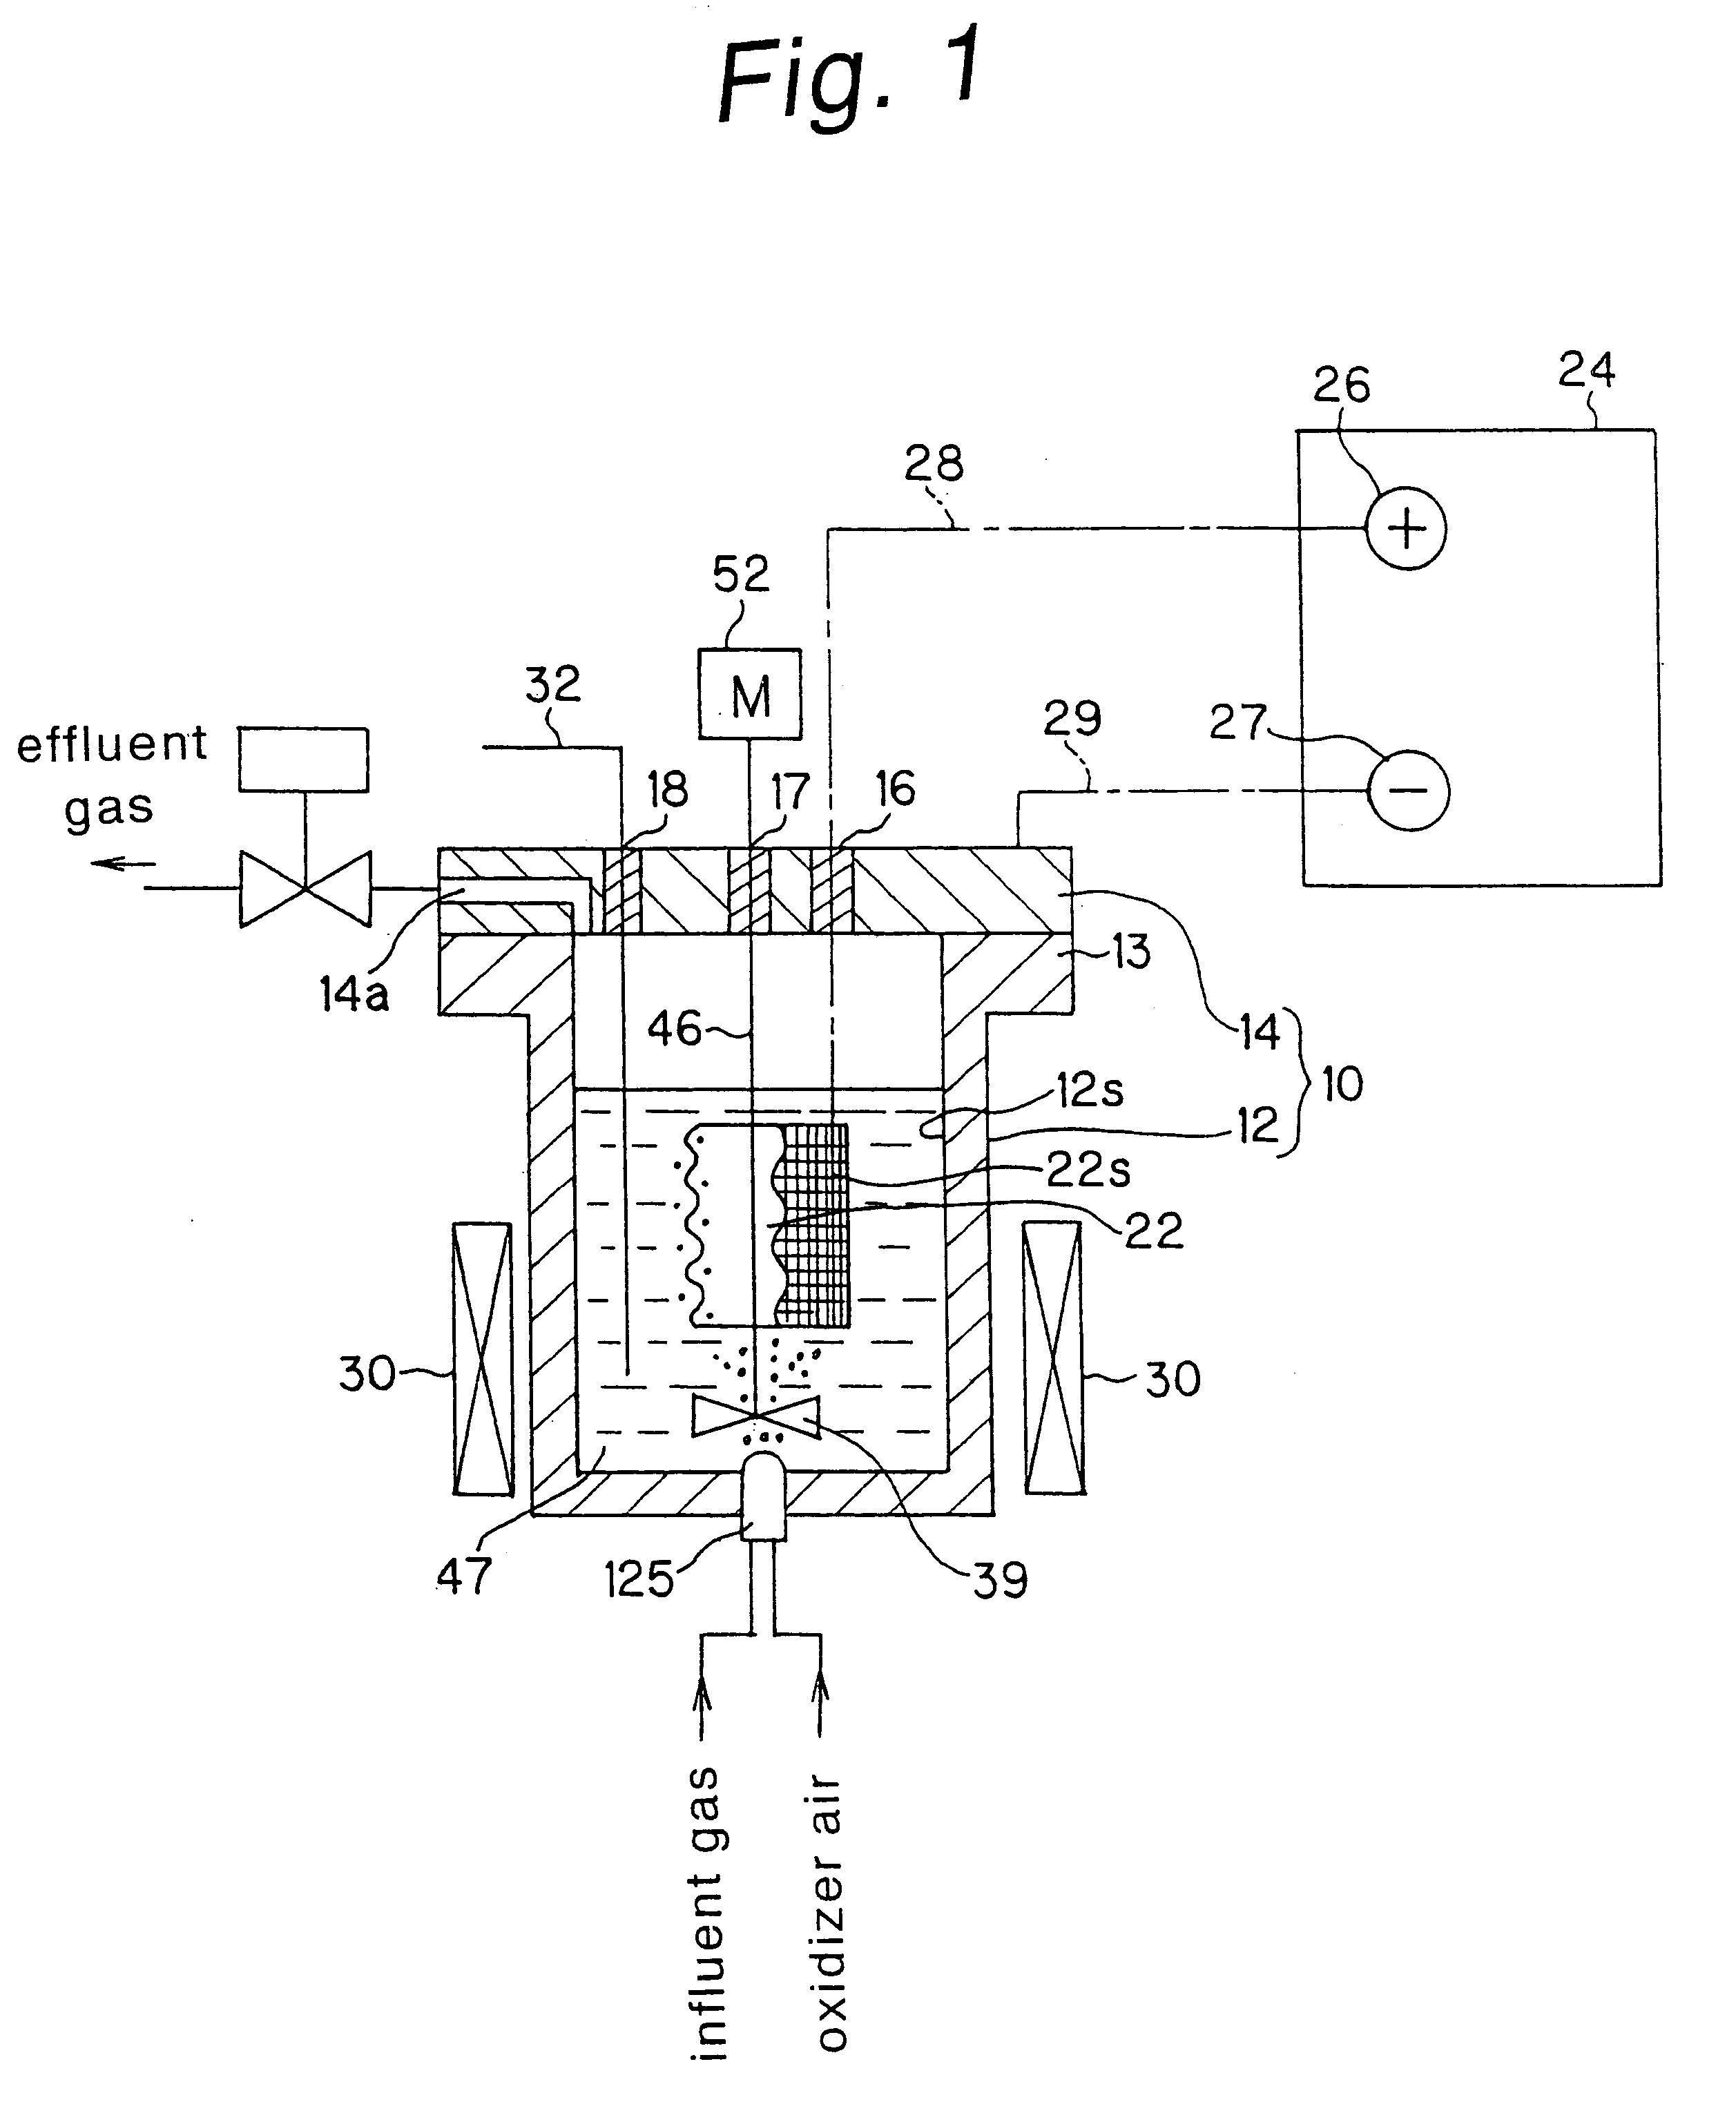 Method and apparatus for treatment of gas by hydrothermal electrolysis